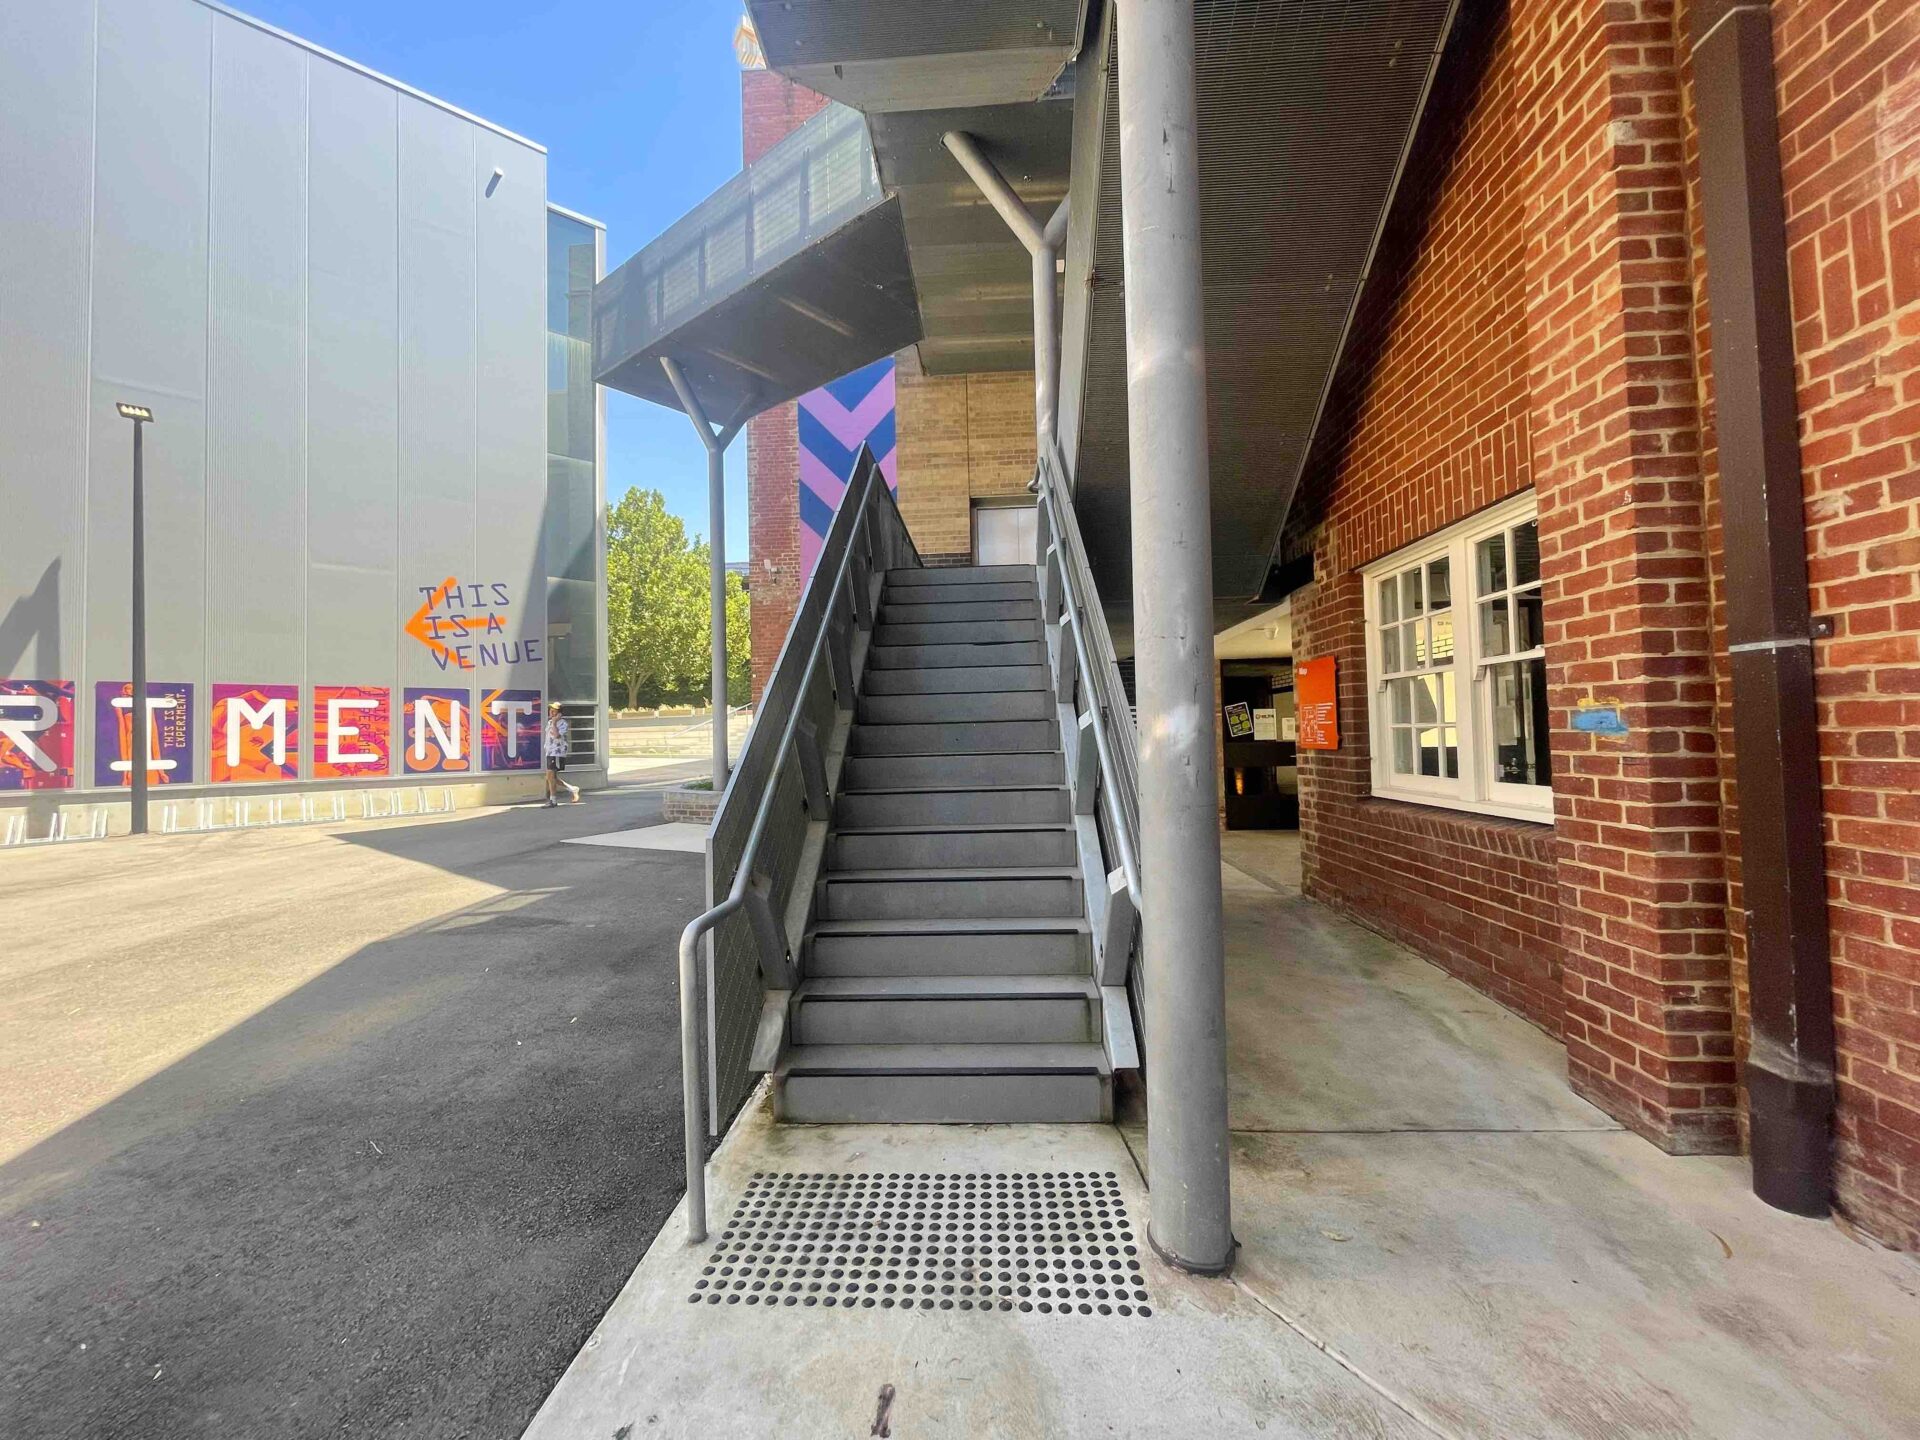 Photo from the bottom of an outdoor concrete staircase looking directly up the stairs. To the right is a red brick building with white windows, and to the left is a tall grey-panelled building with bright pink and purple posters on each panel. Above the staircase are some metal landing spaces that the stairs lead to.